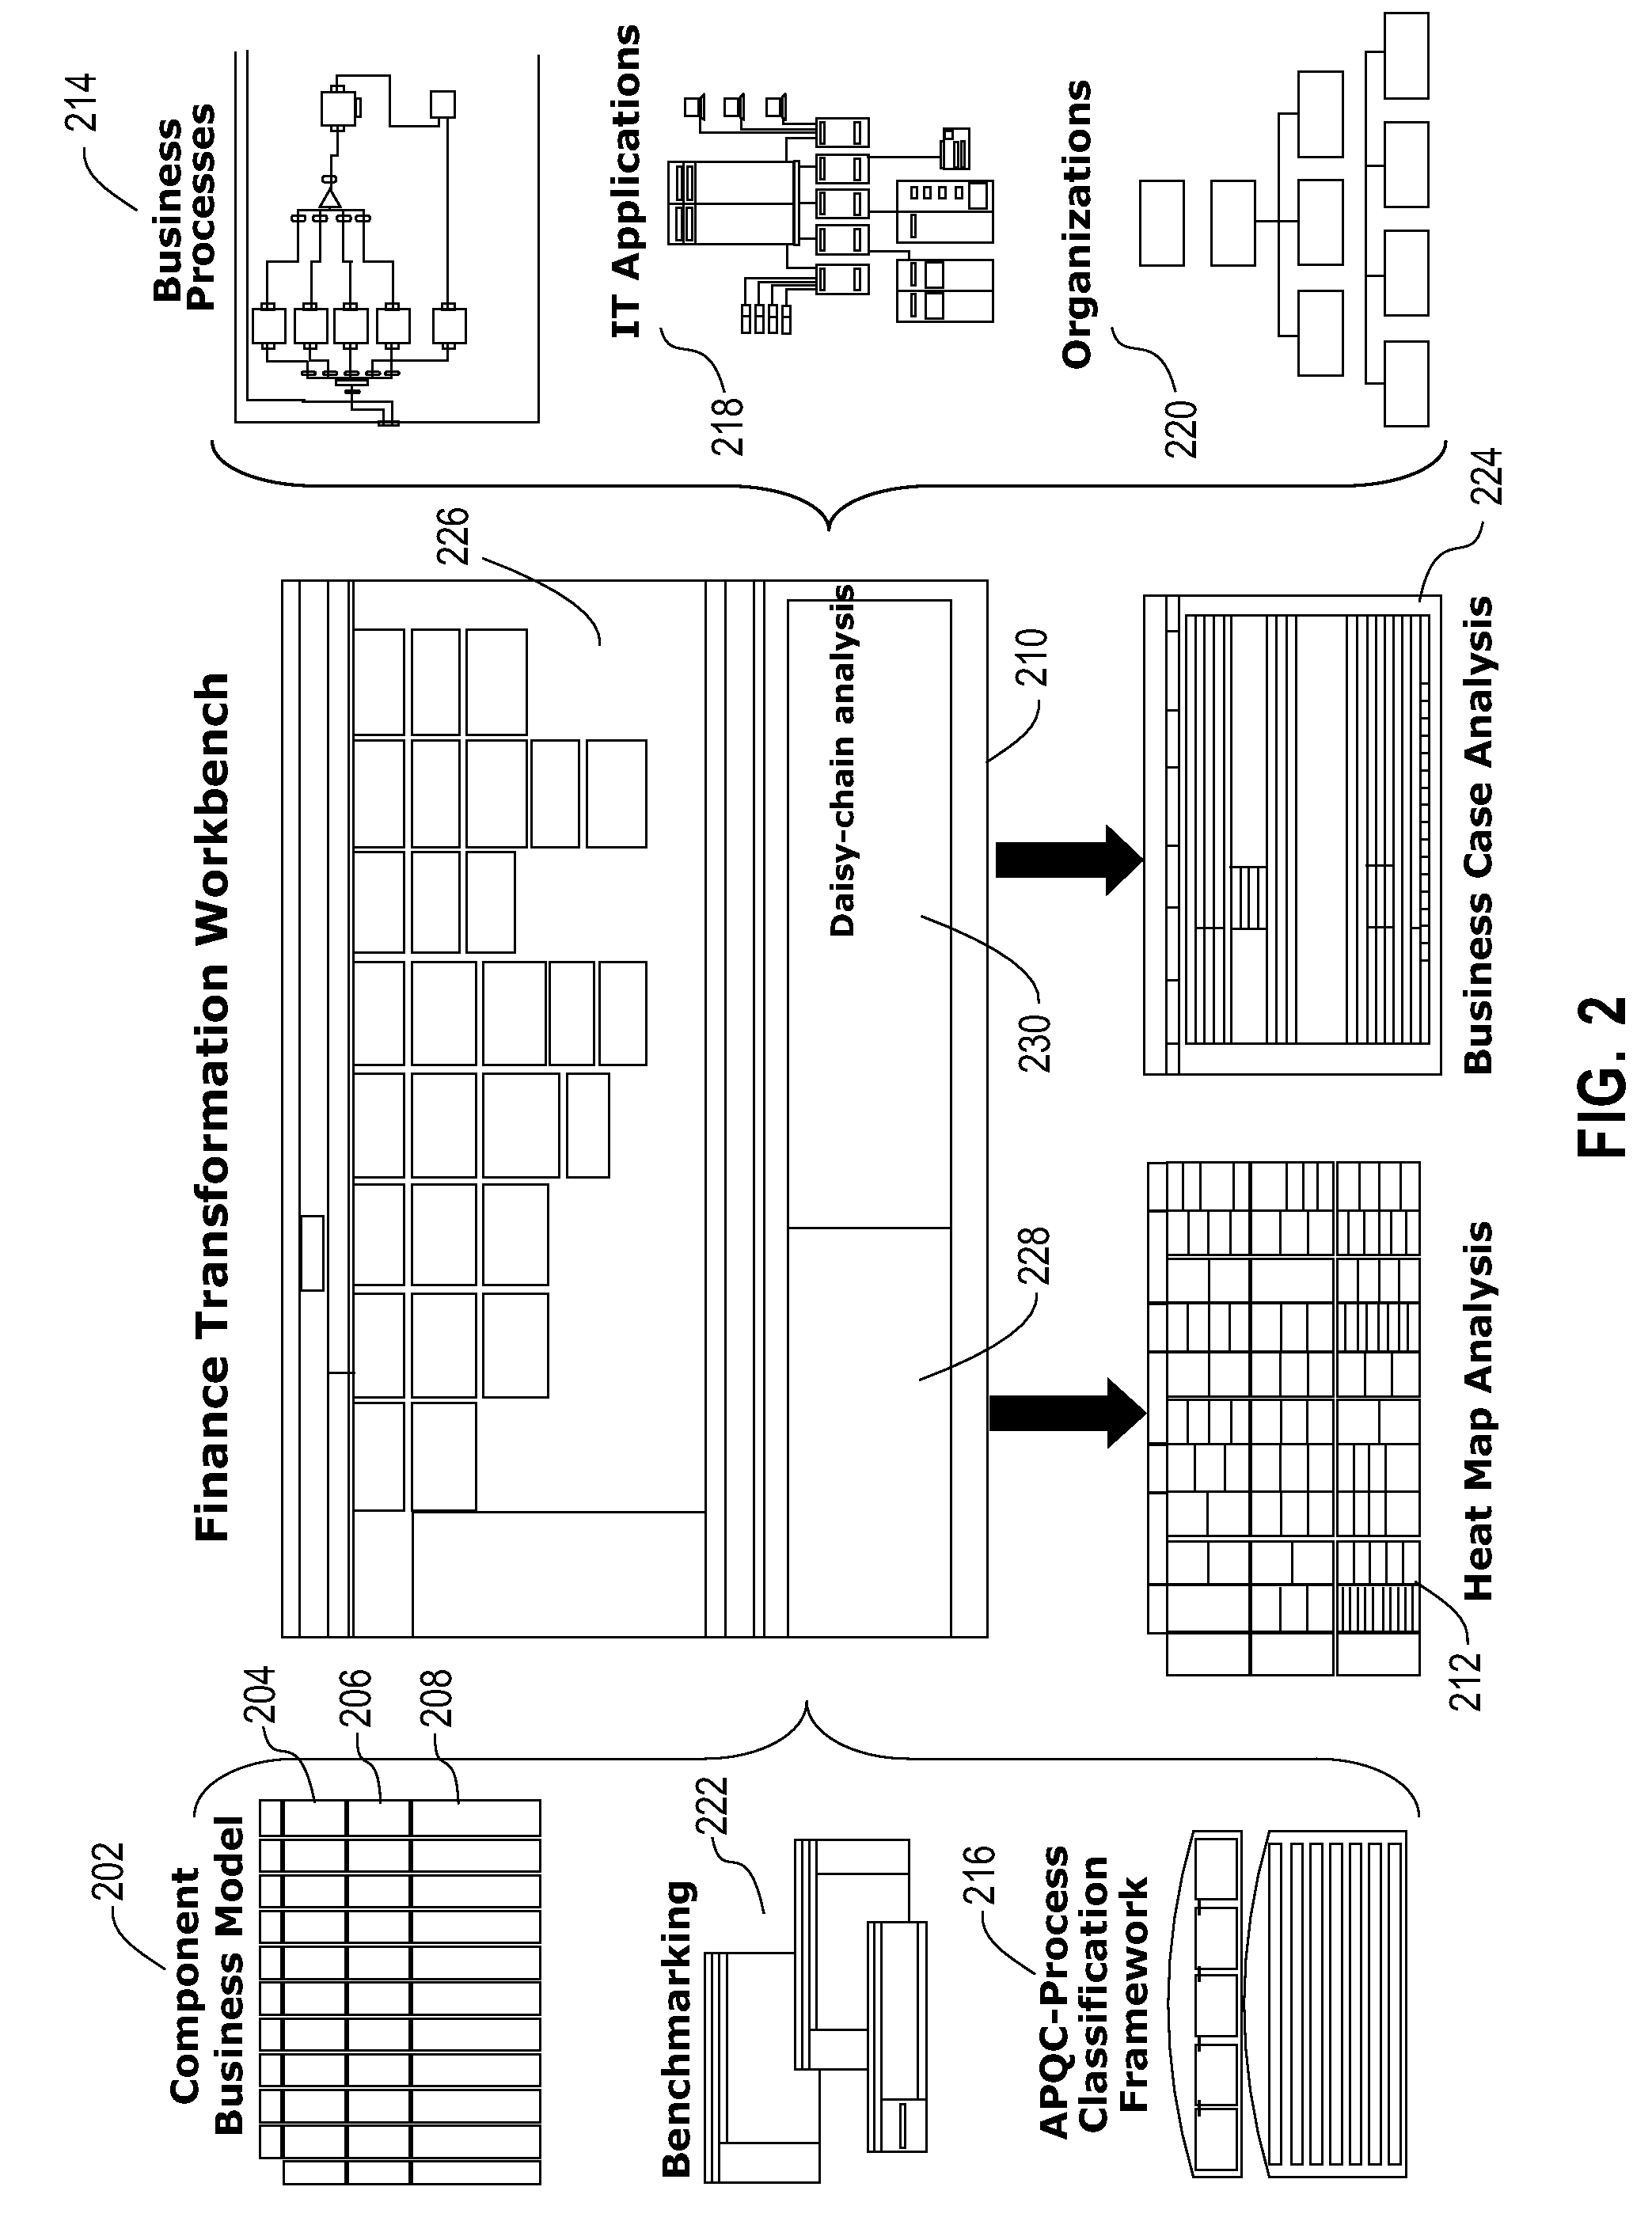 System and method for finding business transformation opportunities by using a multi-dimensional shortfall analysis of an enterprise